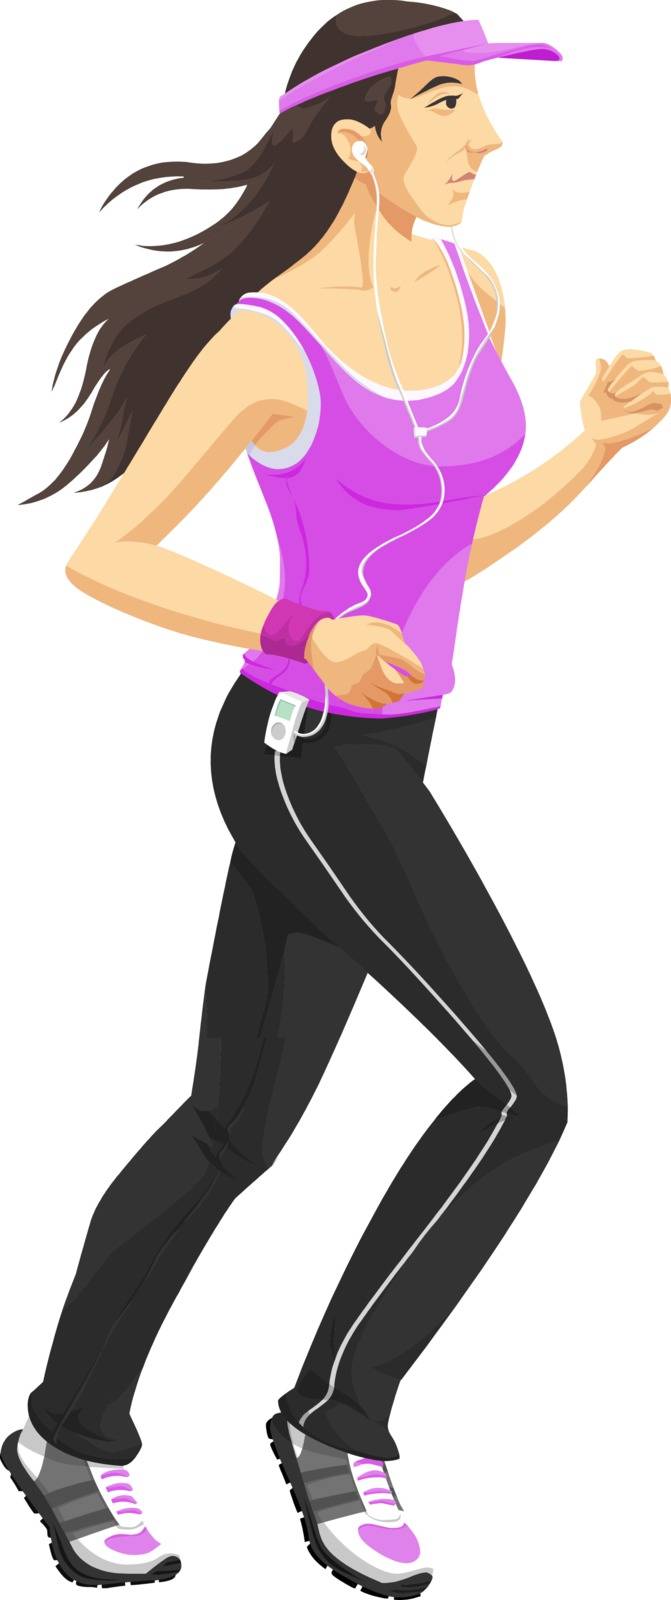 Woman doing exercise or joggin in a purple shirt while listening to music, vector illustration